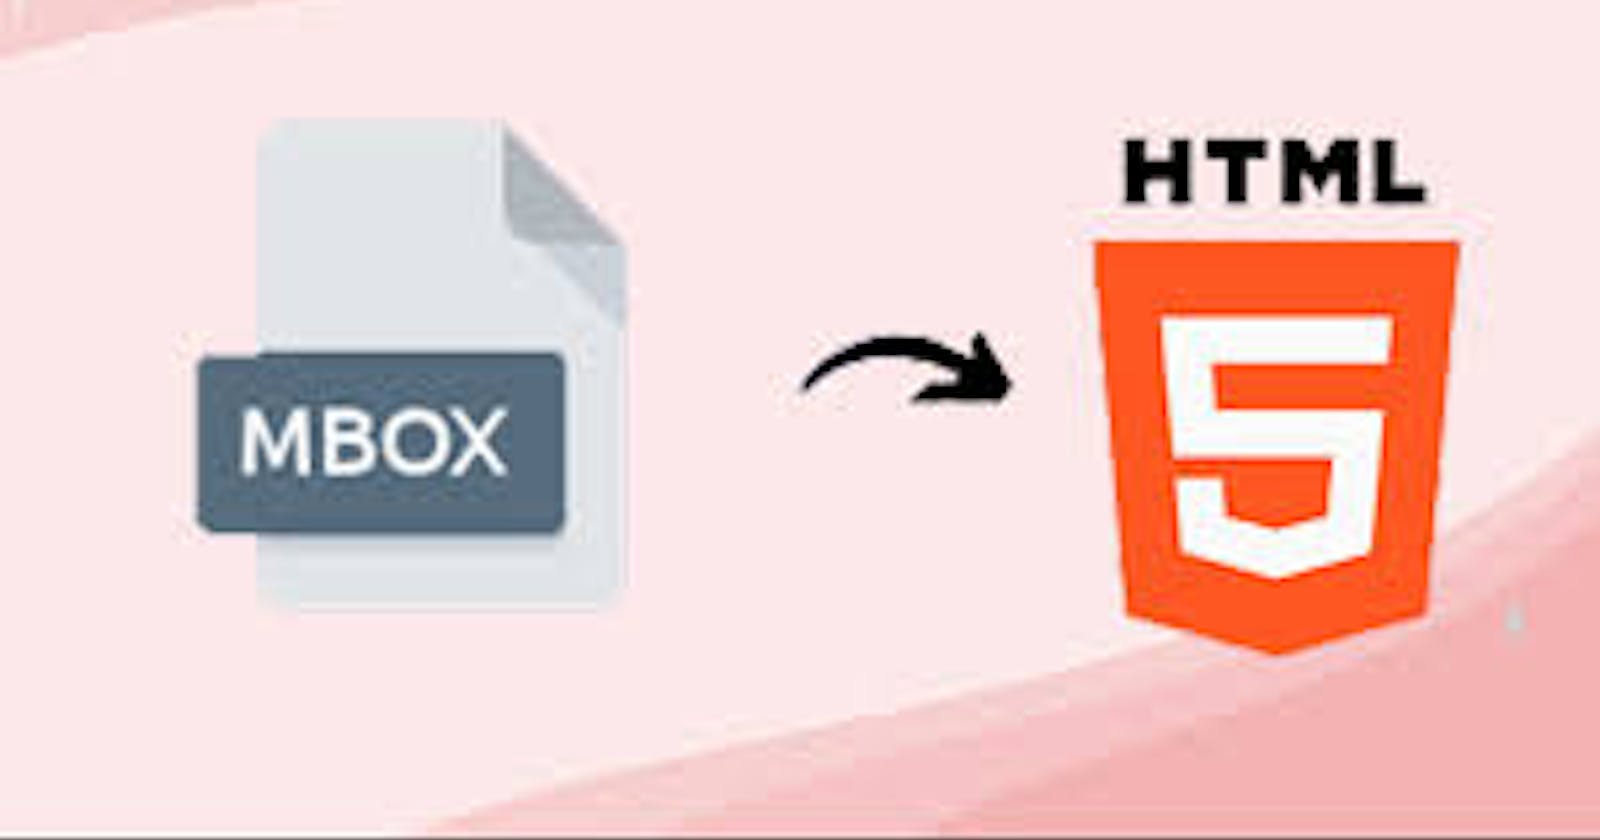 Simplify Your Workflow with MBOX to HTML Batch Conversion